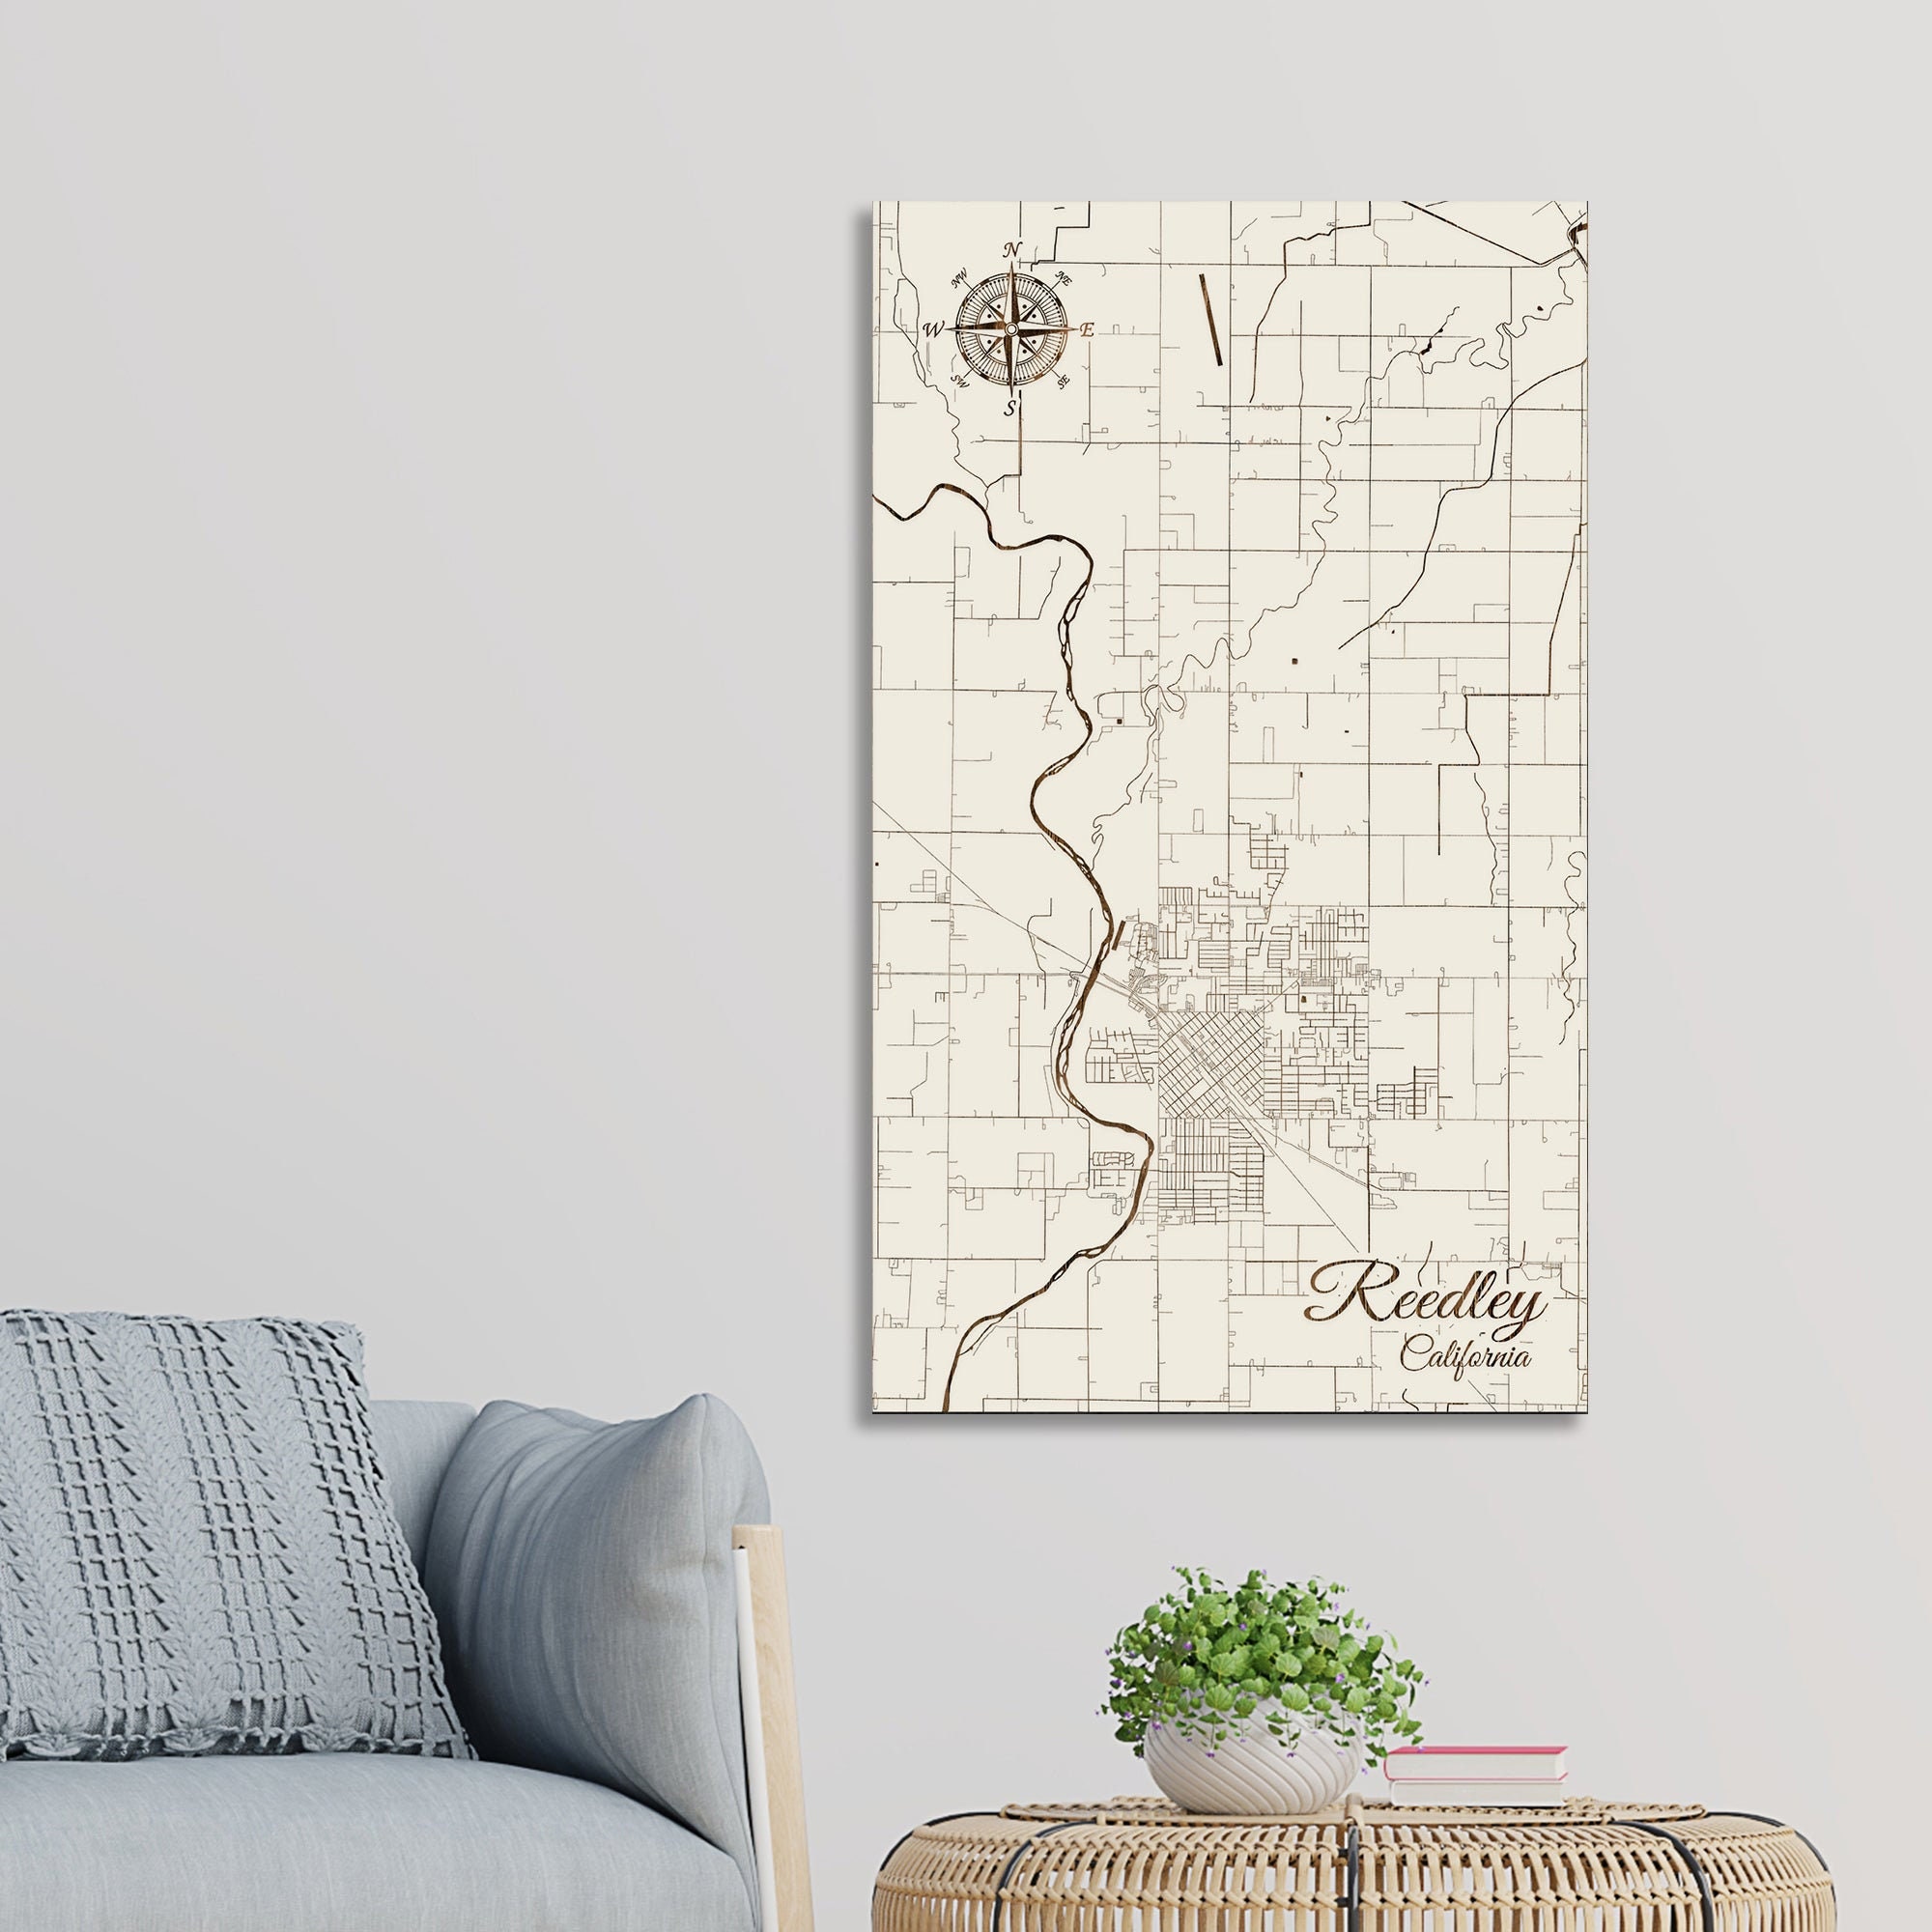 California Reedley Street Map Wood Engraved Maps Wall